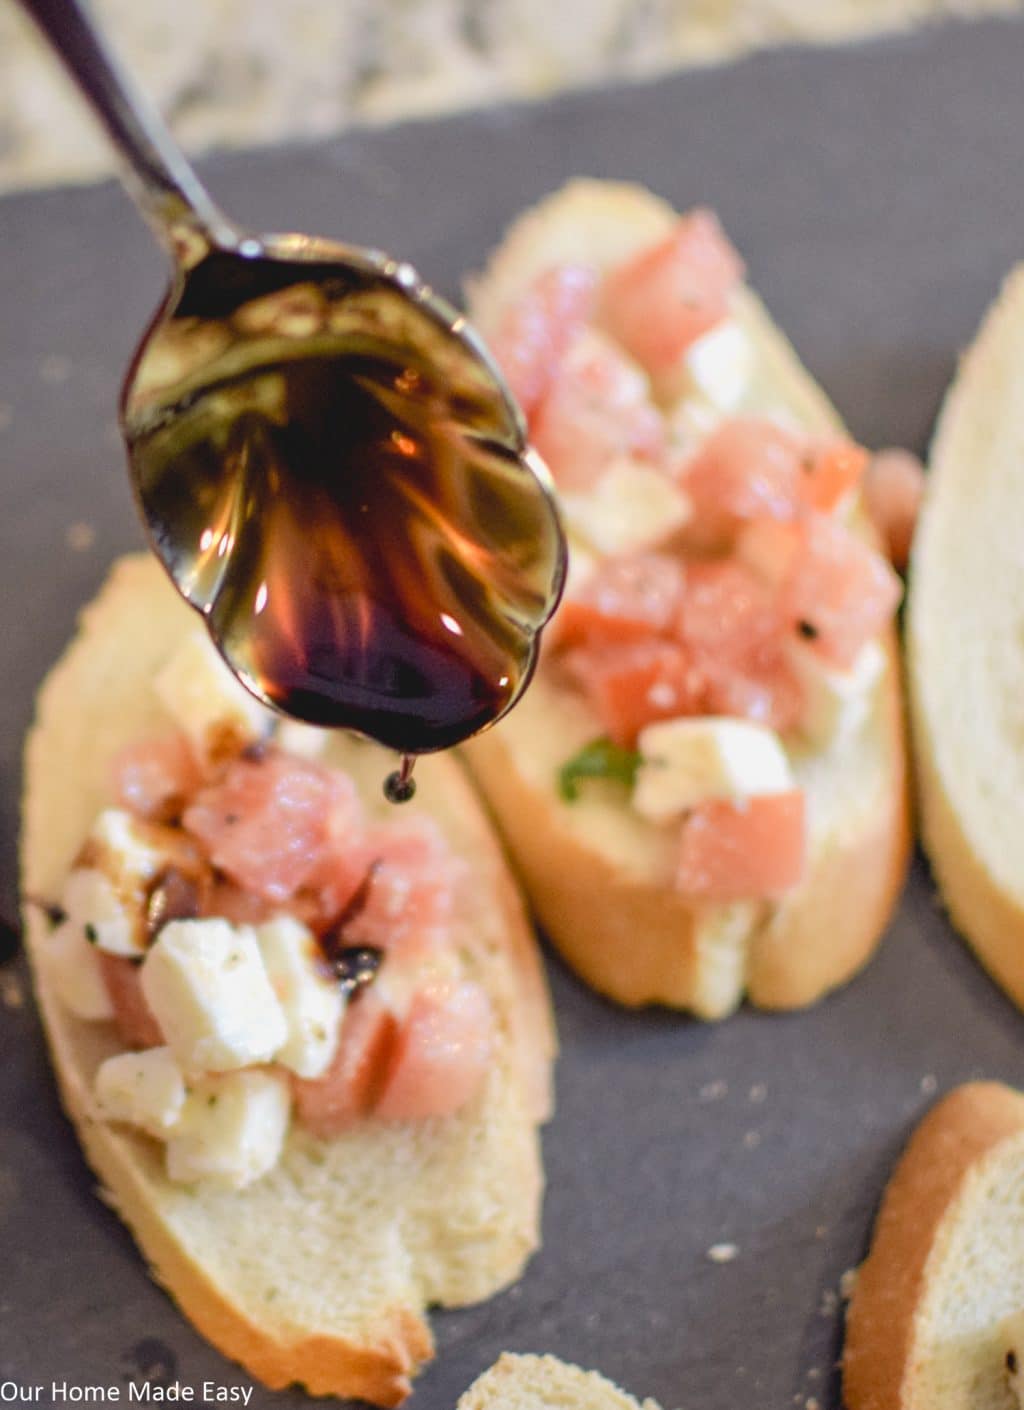 These Caprese Bruschetta bites are drizzled with balsamic dressing